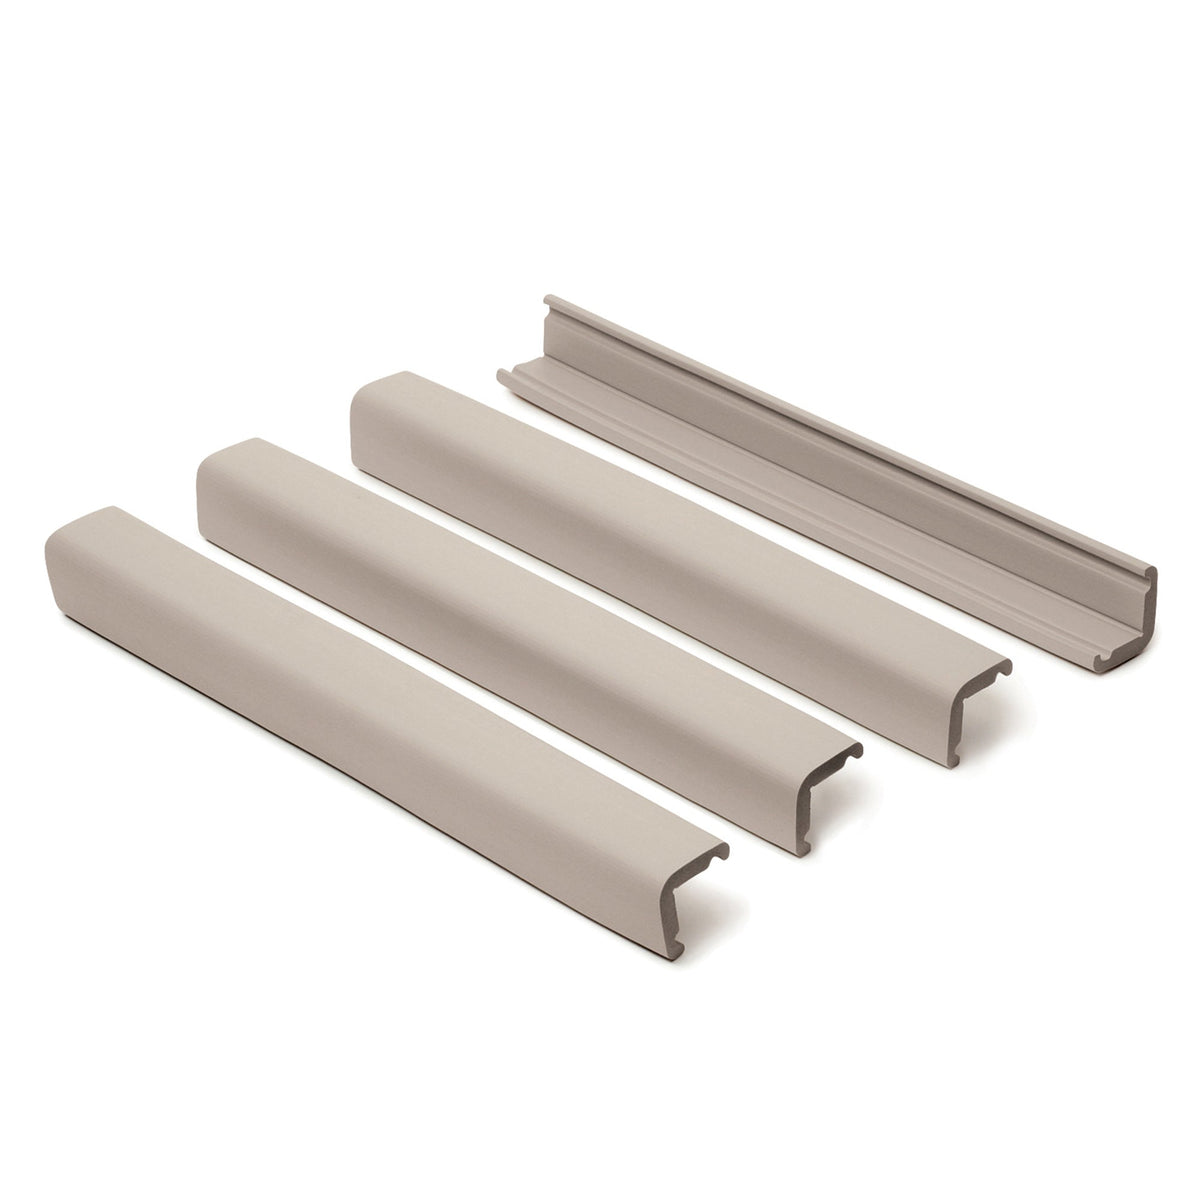 Buy Furniture Edge Guards Online at Best Prices in India